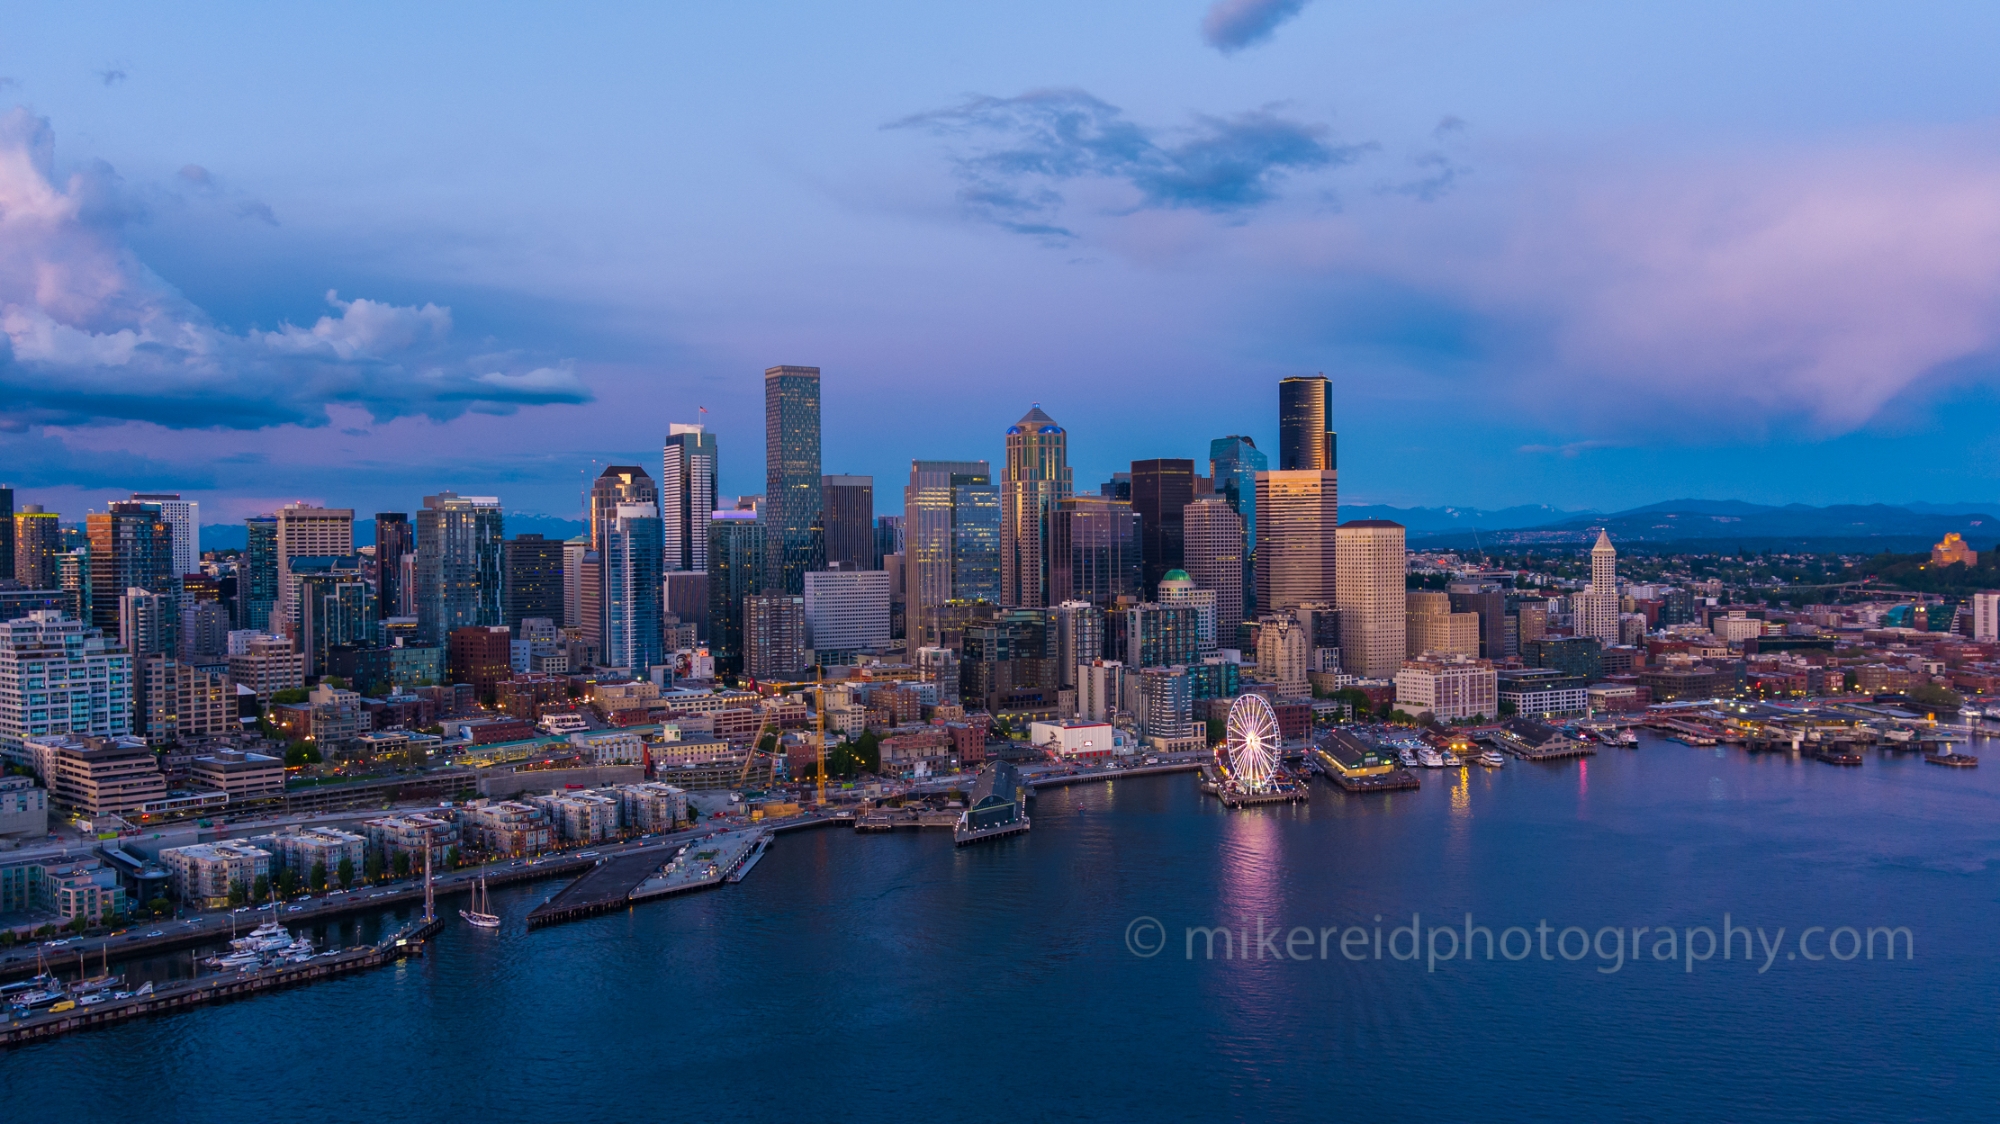 Seattle Aerial Waterfront Blue Hour.jpg Aerial views over Seattle and surroundings in these unique video and photographic perspectives. To arrange a custom Seattle aerial photography tour, please contacct me. #seattle